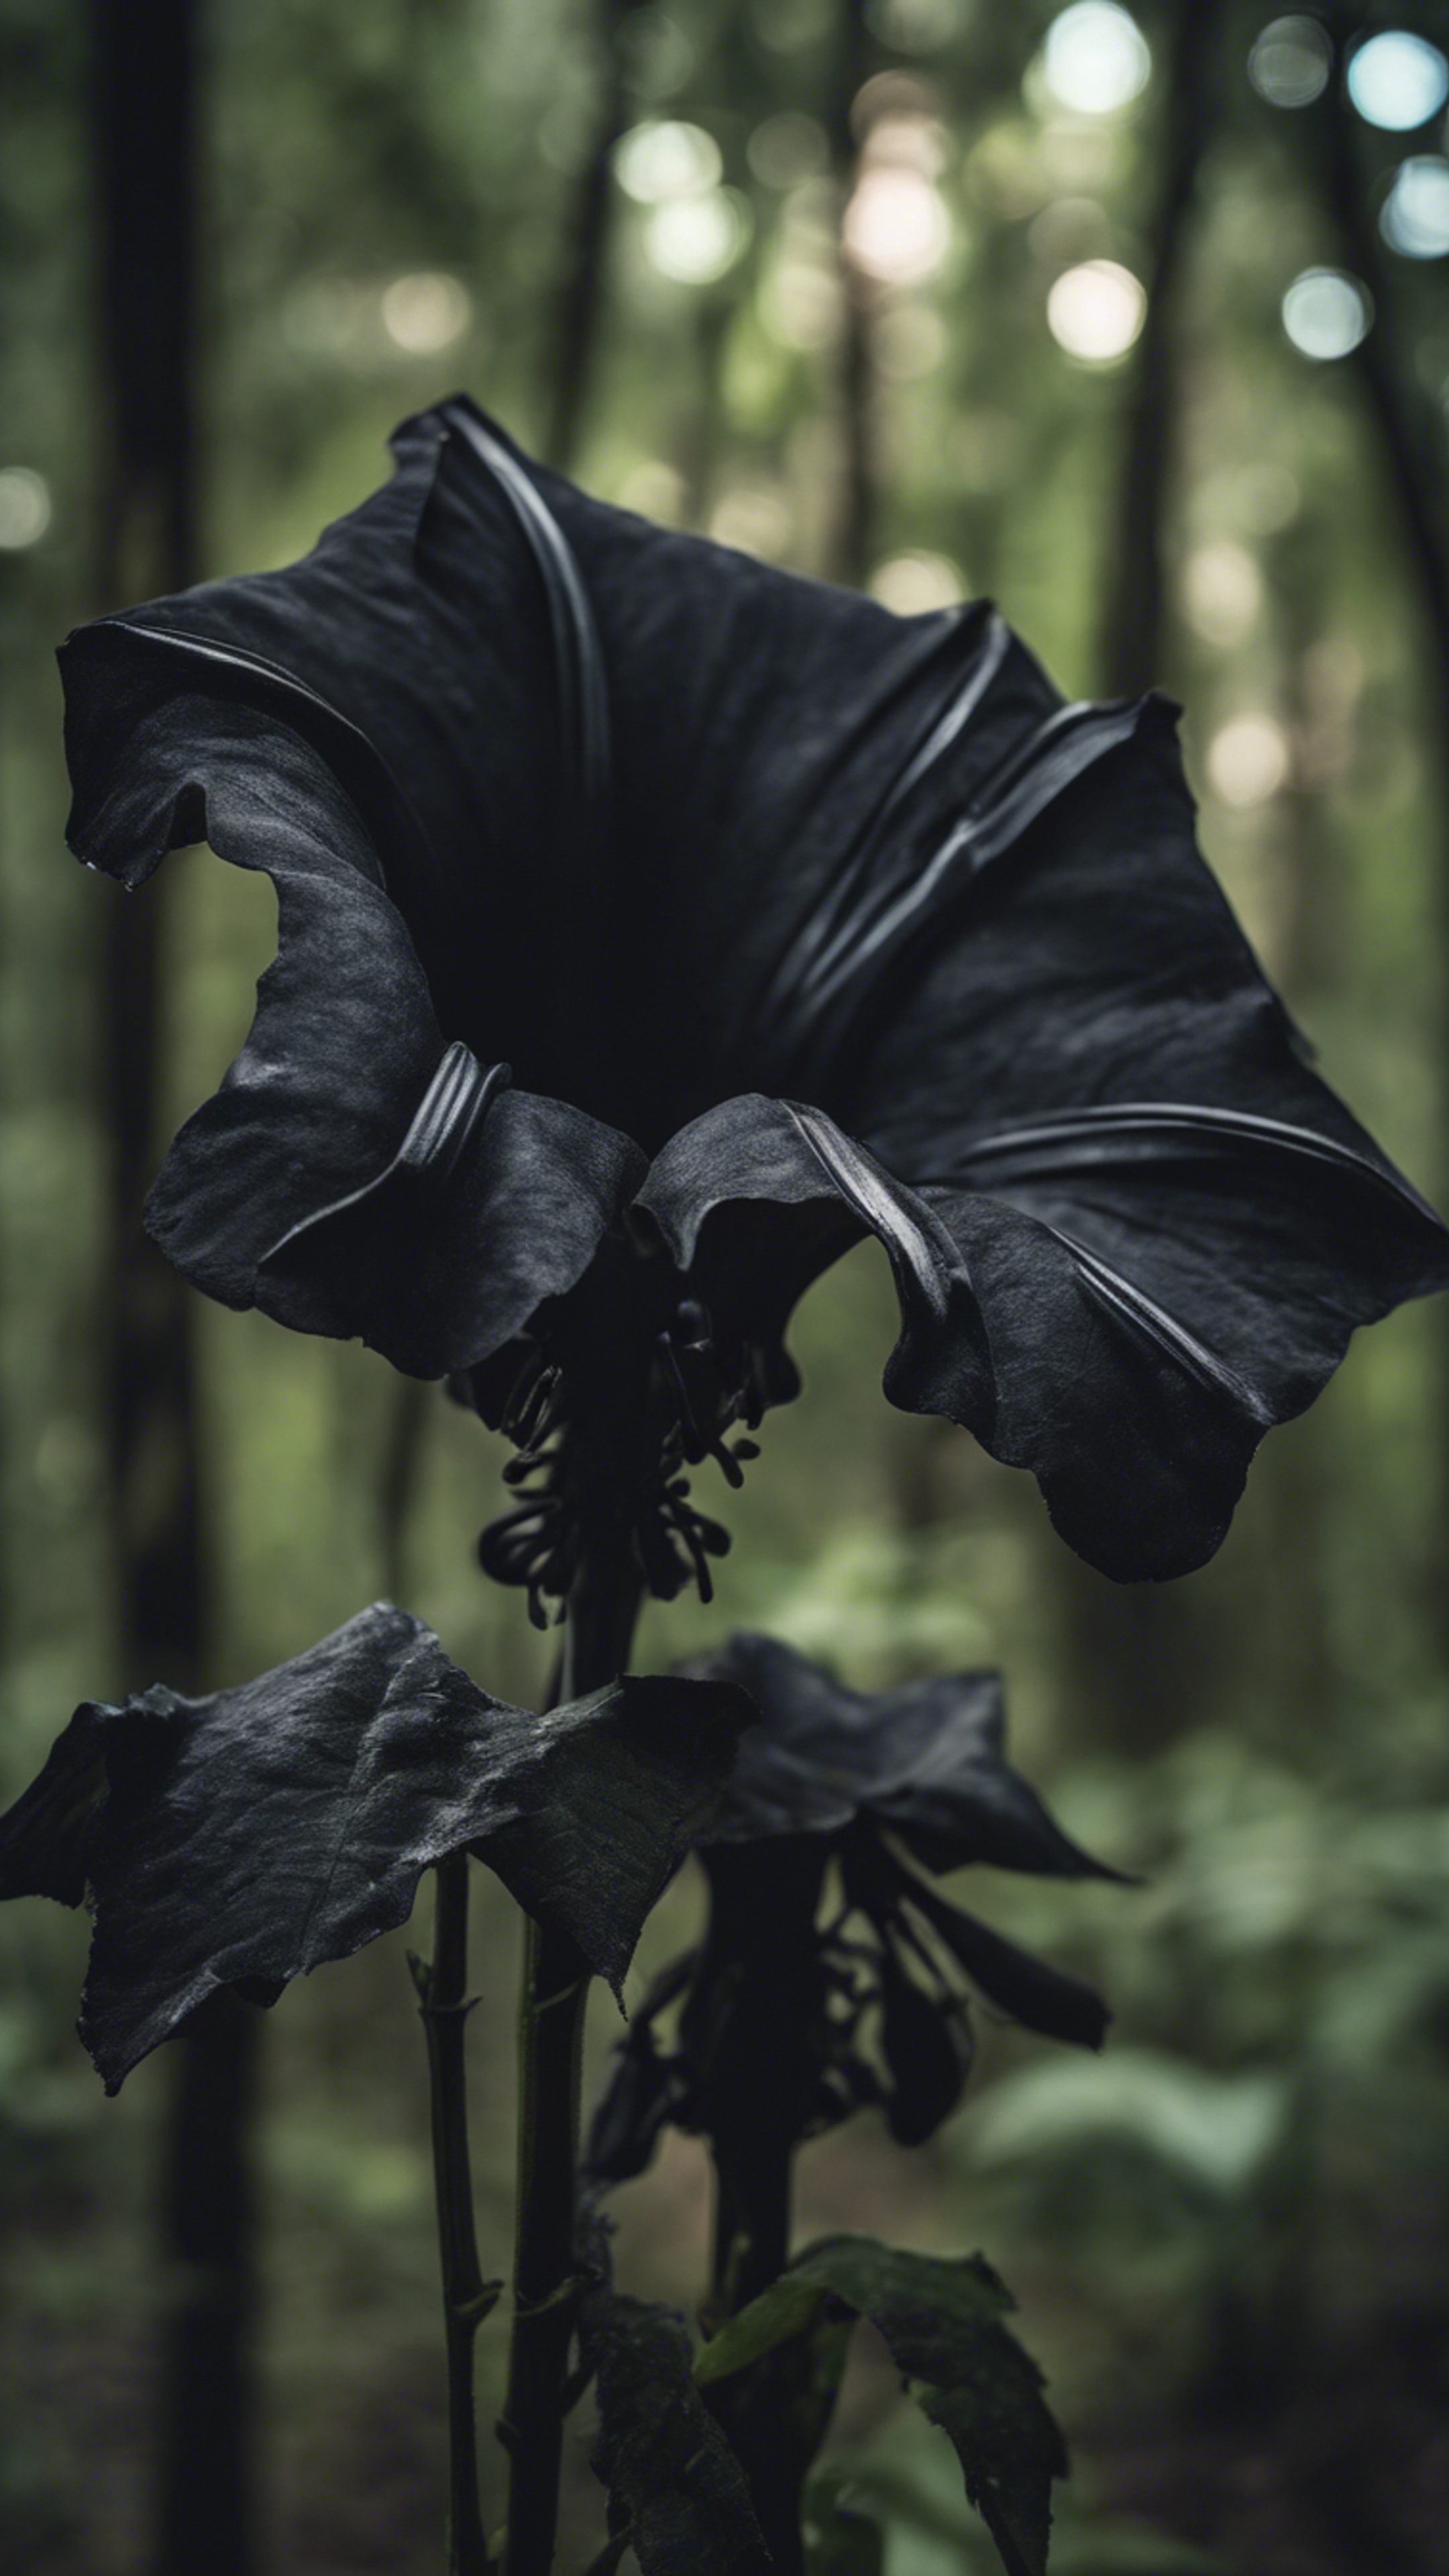 A black trumpet flower evoking an eerie yet captivating atmosphere in the heart of a dense forest. Fondo de pantalla[87d98efd7999478c8568]